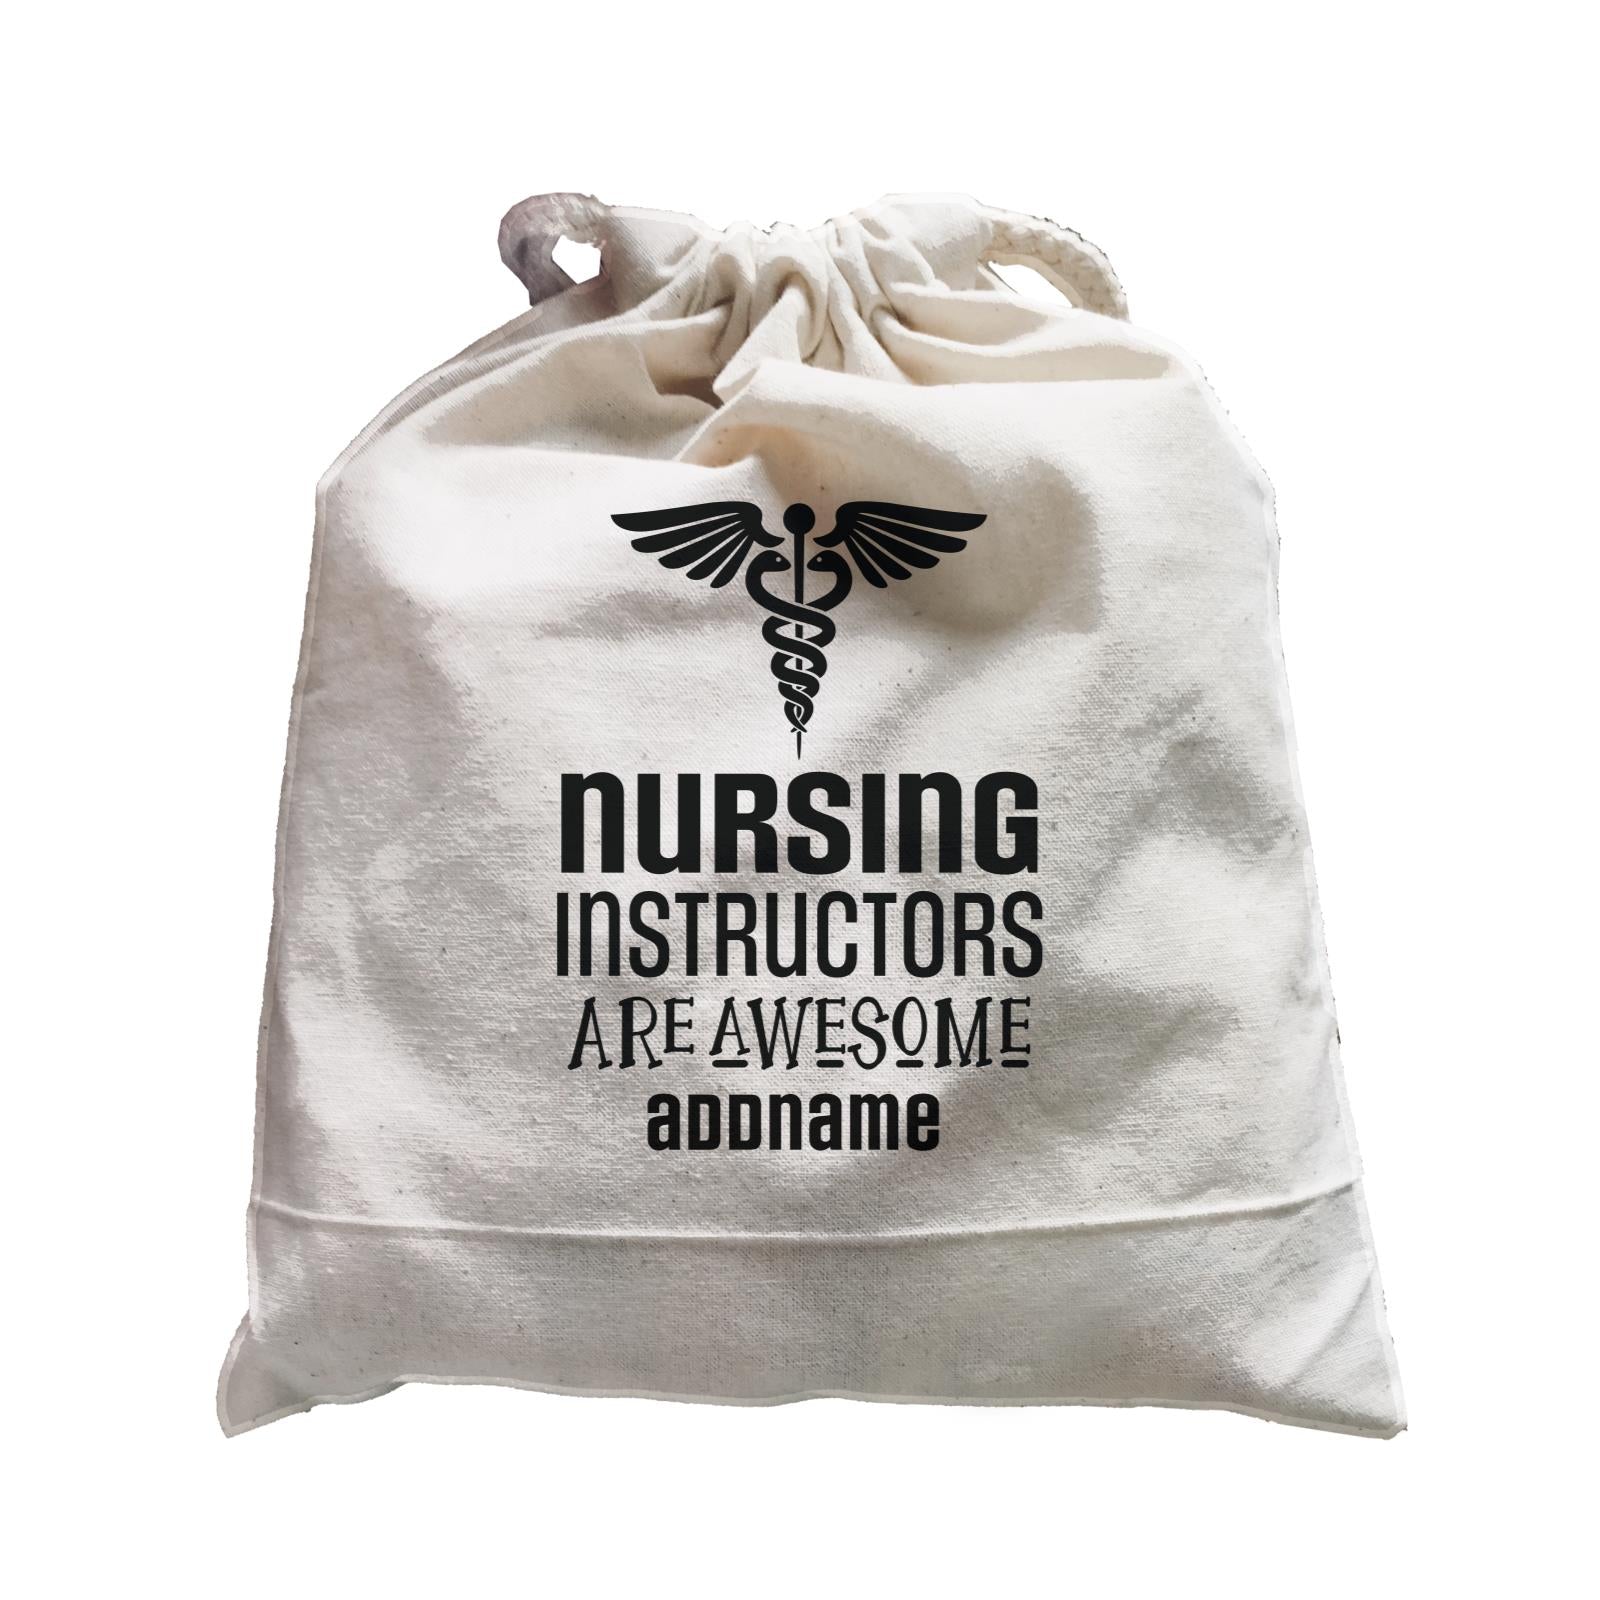 Nurse Quotes Nursing Instructors Are Awesome Addname Satchel